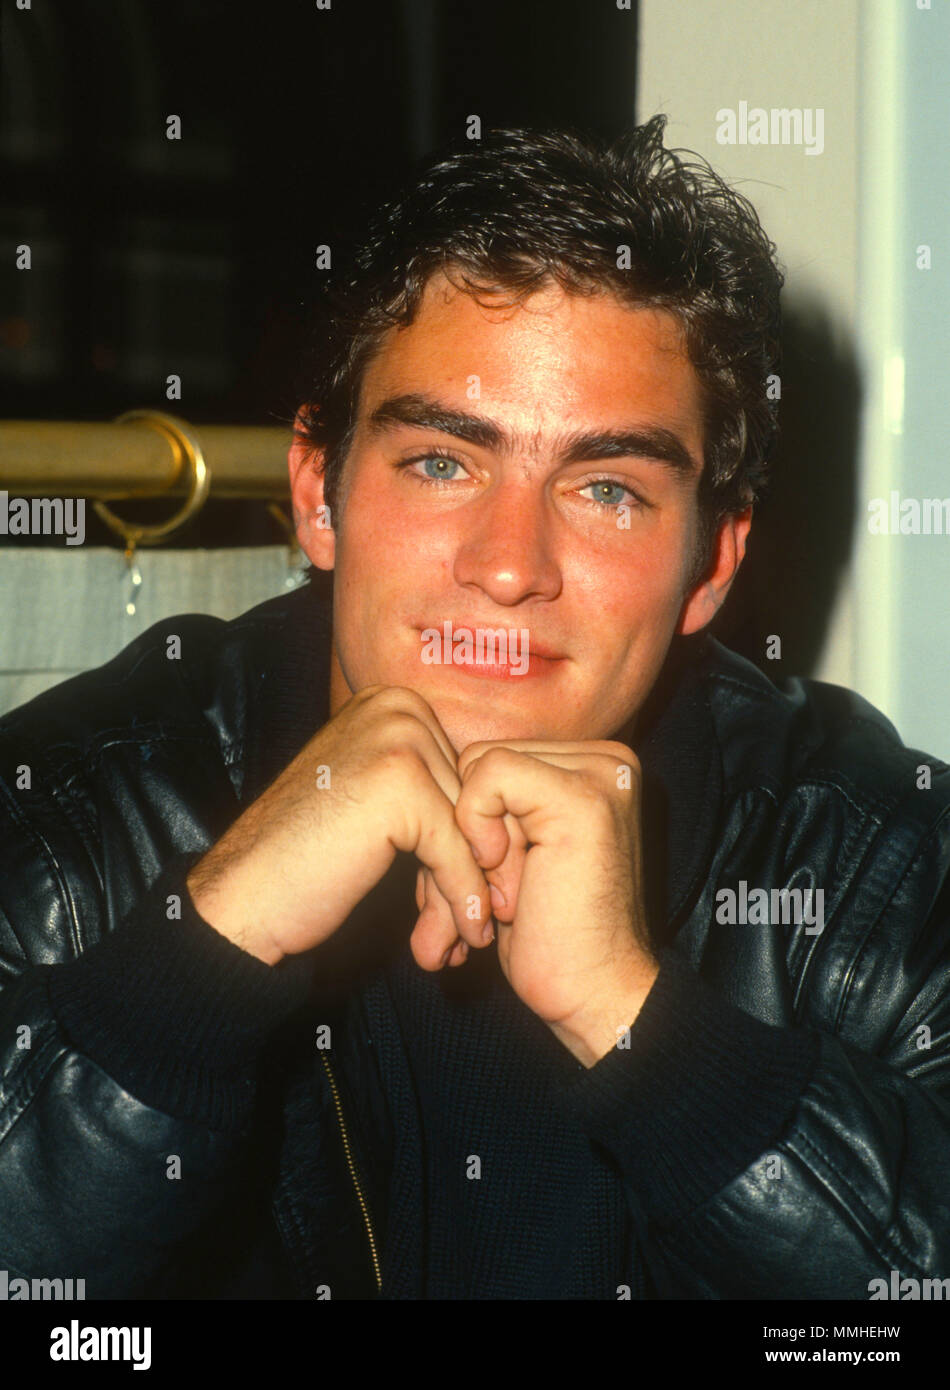 SHERMAN OAKS, CA - MAY 19: Actor Rodney Harvey attends event for 'The Outsiders' television series at Sherman Oaks Galleria on May 19, 1990 in Sherman Oaks, California. Photo by Barry King/Alamy Stock Photo Stock Photo